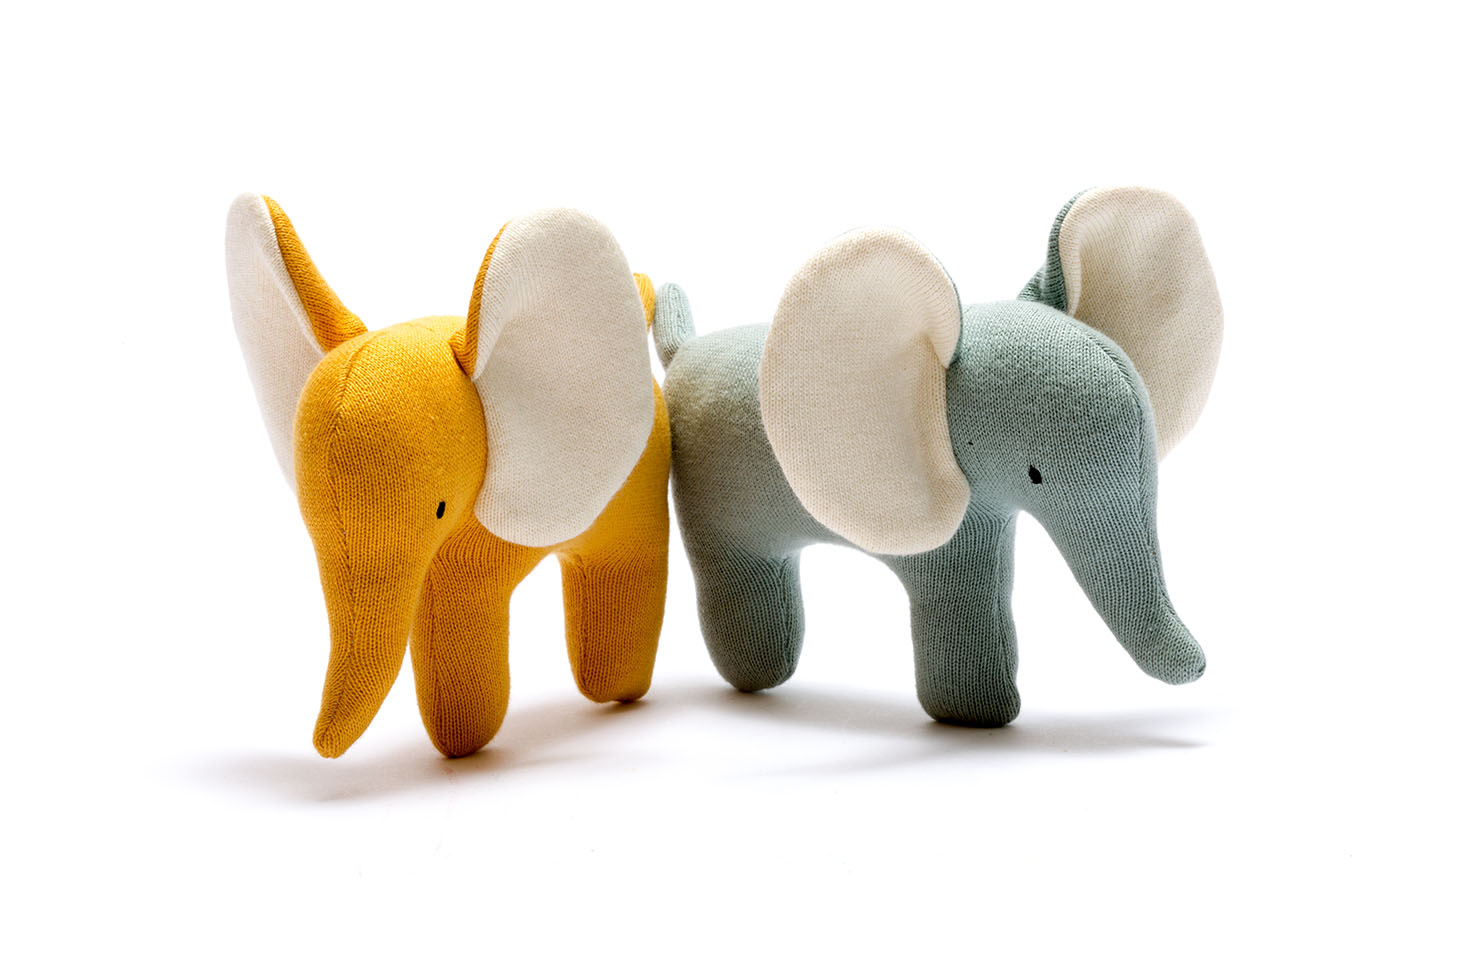 Teal and Mustard elephants